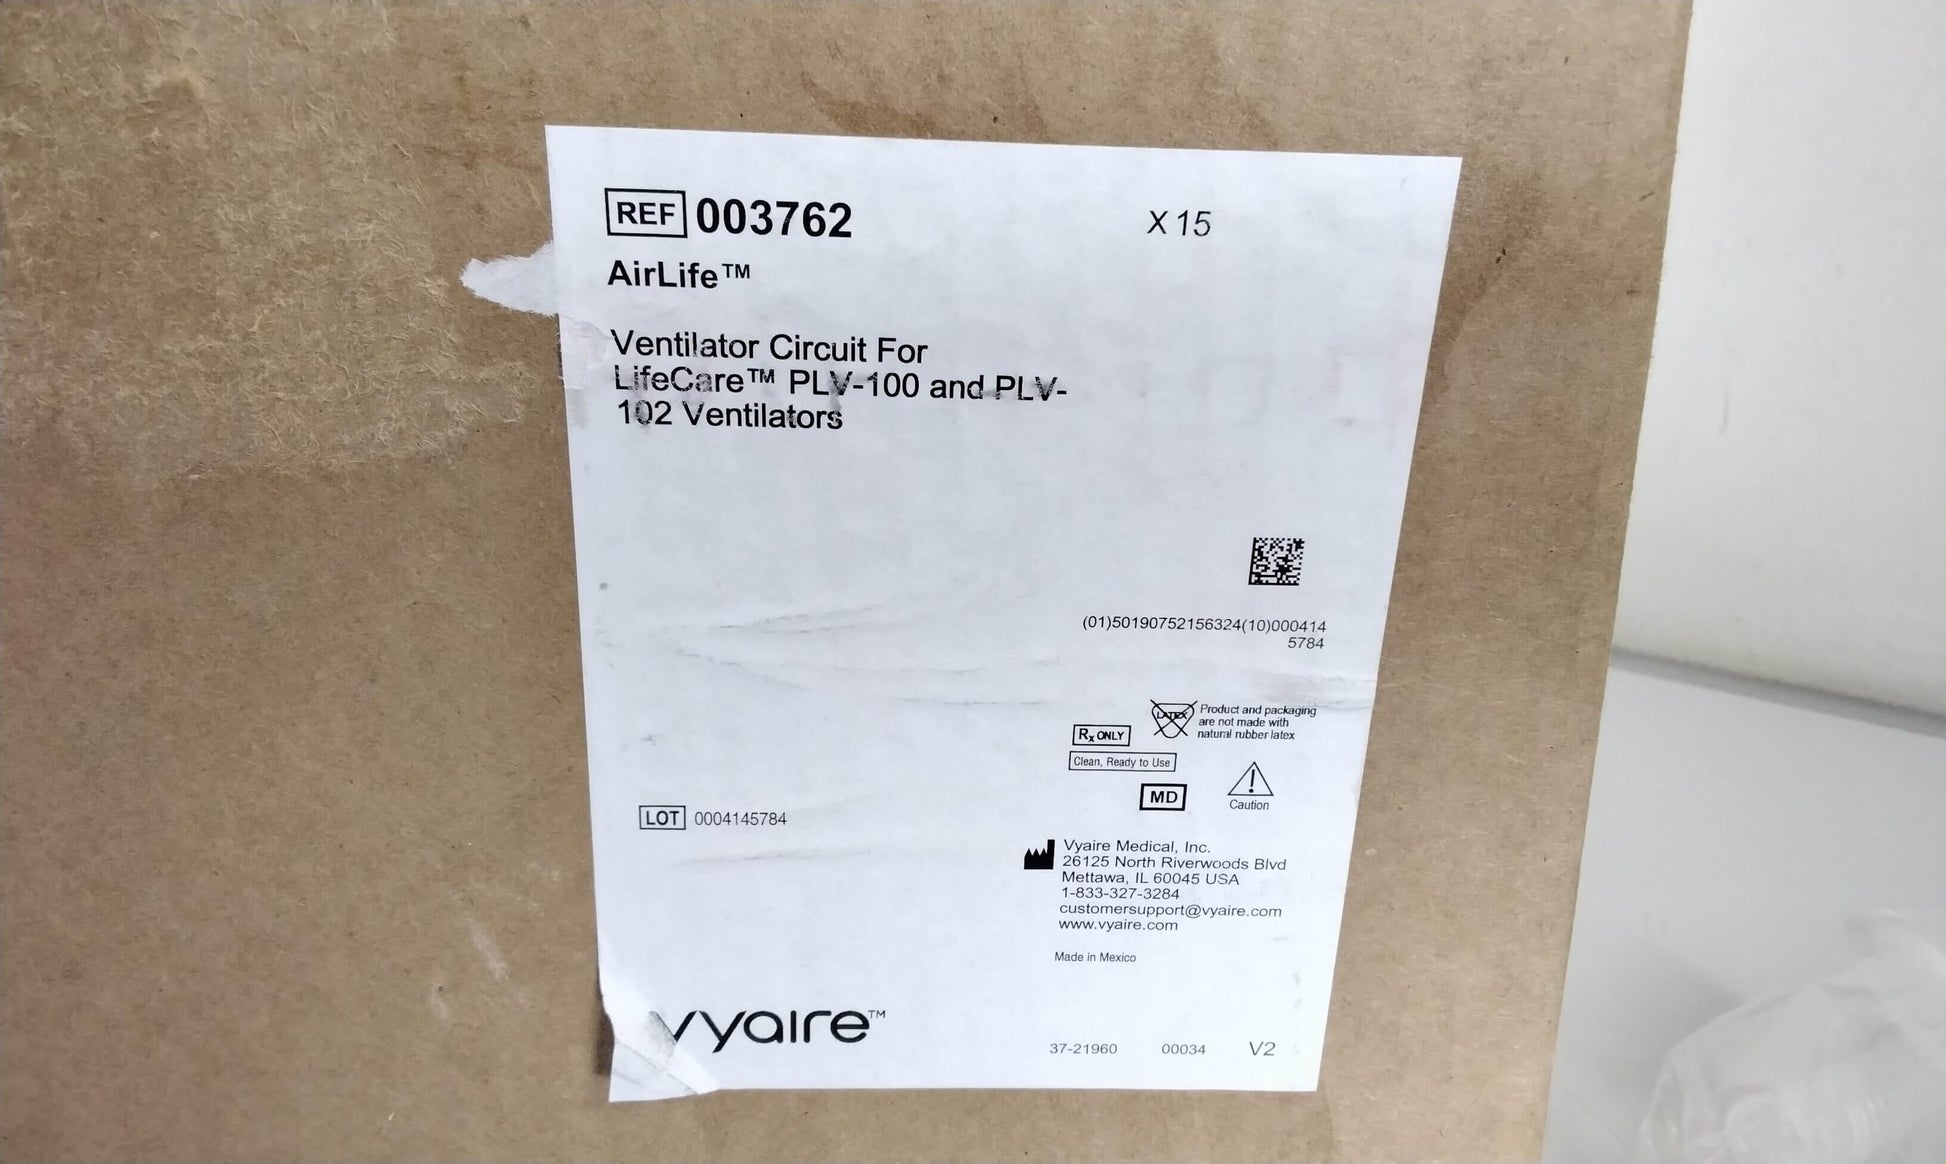 NEW 15PK Vyaire Airlife Ventilator Patient Circuit 003762 with Free Shipping - MBR Medicals